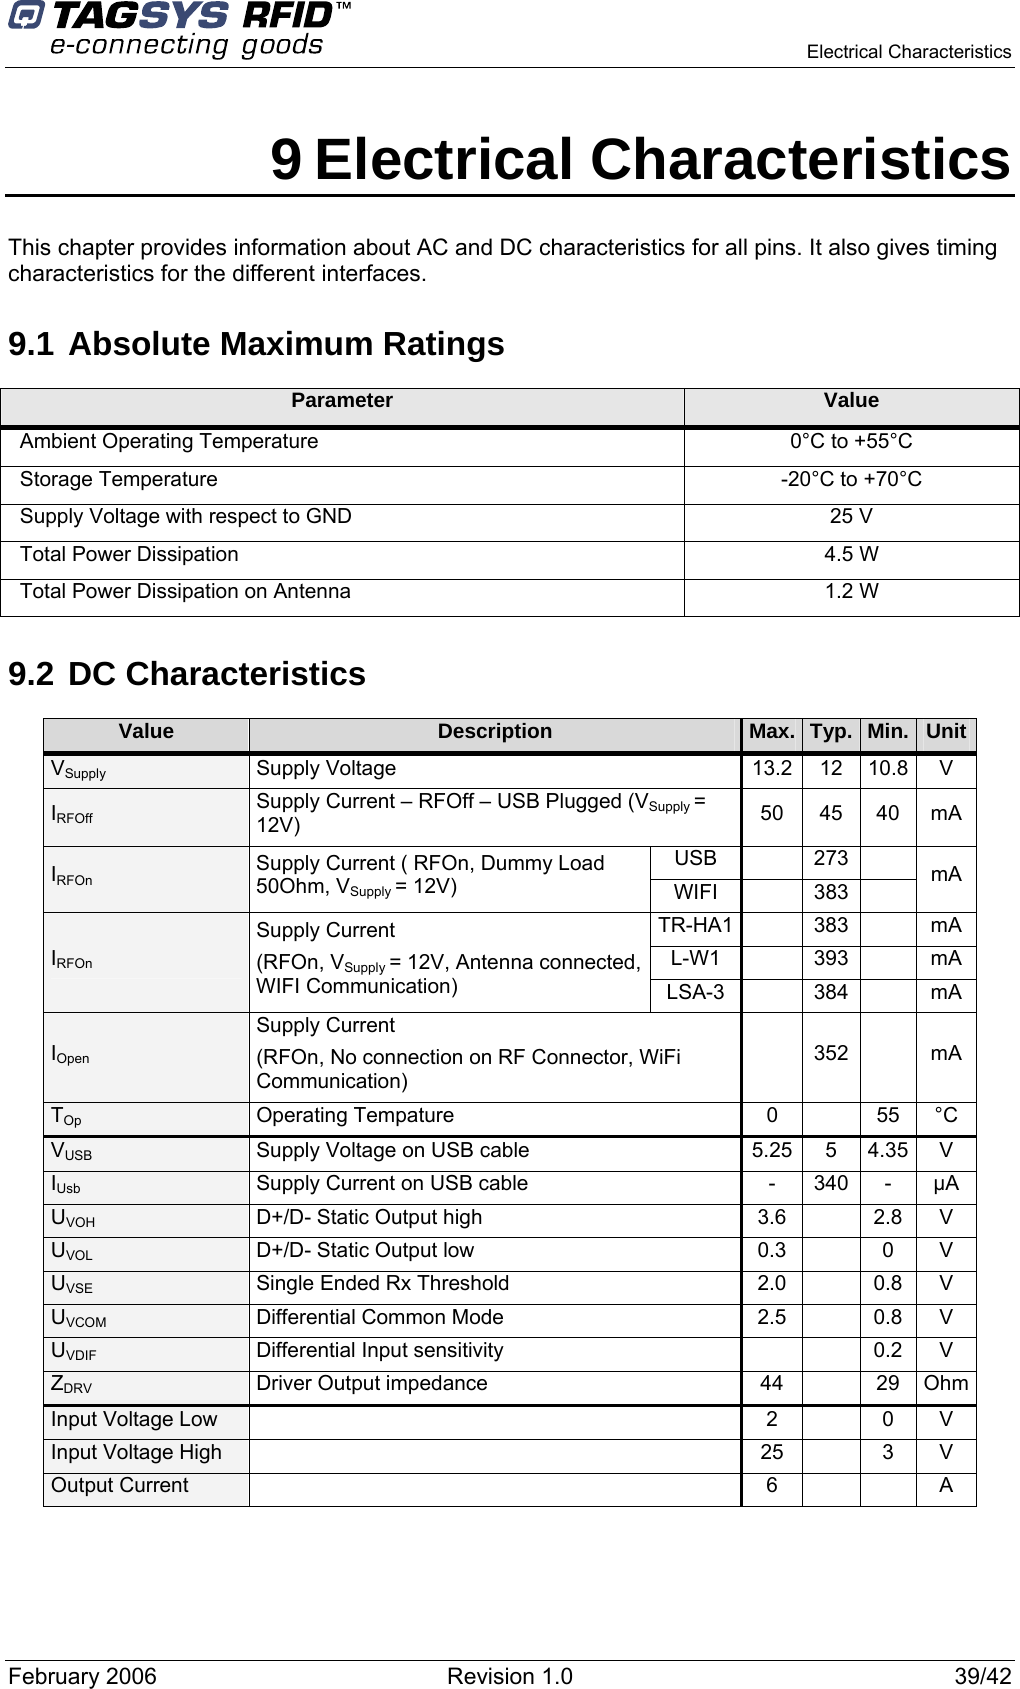    Electrical Characteristics  February 2006  Revision 1.0  39/42 9 Electrical Characteristics This chapter provides information about AC and DC characteristics for all pins. It also gives timing characteristics for the different interfaces. 9.1 Absolute Maximum Ratings Parameter  Value Ambient Operating Temperature   0°C to +55°C Storage Temperature  -20°C to +70°C Supply Voltage with respect to GND  25 V Total Power Dissipation   4.5 W Total Power Dissipation on Antenna  1.2 W  9.2 DC Characteristics Value  Description  Max.  Typ.  Min.  UnitVSupply  Supply Voltage  13.2  12  10.8  V IRFOff Supply Current – RFOff – USB Plugged (VSupply = 12V)  50 45 40 mA USB  273  IRFOn Supply Current ( RFOn, Dummy Load 50Ohm, VSupply = 12V)  WIFI  383  mA TR-HA1   383   mA L-W1  393  mA IRFOn Supply Current  (RFOn, VSupply = 12V, Antenna connected, WIFI Communication)  LSA-3  384  mA IOpen Supply Current (RFOn, No connection on RF Connector, WiFi Communication)  352  mA TOp  Operating Tempature  0    55  °C VUSB  Supply Voltage on USB cable  5.25  5  4.35  V IUsb  Supply Current on USB cable  -  340  -  µA UVOH  D+/D- Static Output high  3.6    2.8  V UVOL  D+/D- Static Output low  0.3    0  V UVSE  Single Ended Rx Threshold  2.0    0.8  V UVCOM  Differential Common Mode  2.5    0.8  V UVDIF  Differential Input sensitivity      0.2  V ZDRV  Driver Output impedance  44    29  OhmInput Voltage Low    2    0  V Input Voltage High  25  3 V Output Current  6   A   